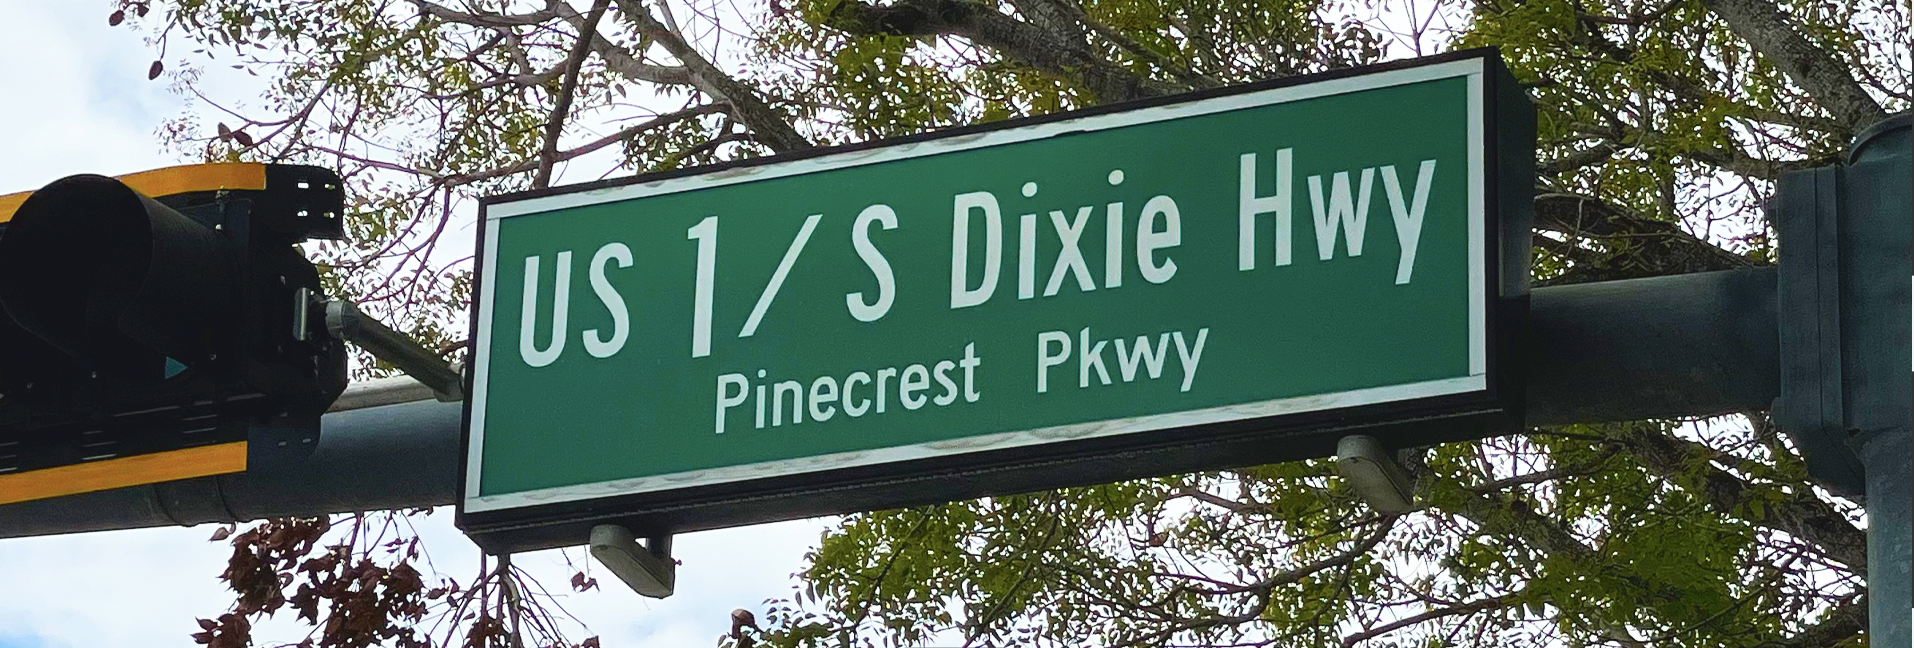 Dixie Hwy street sign